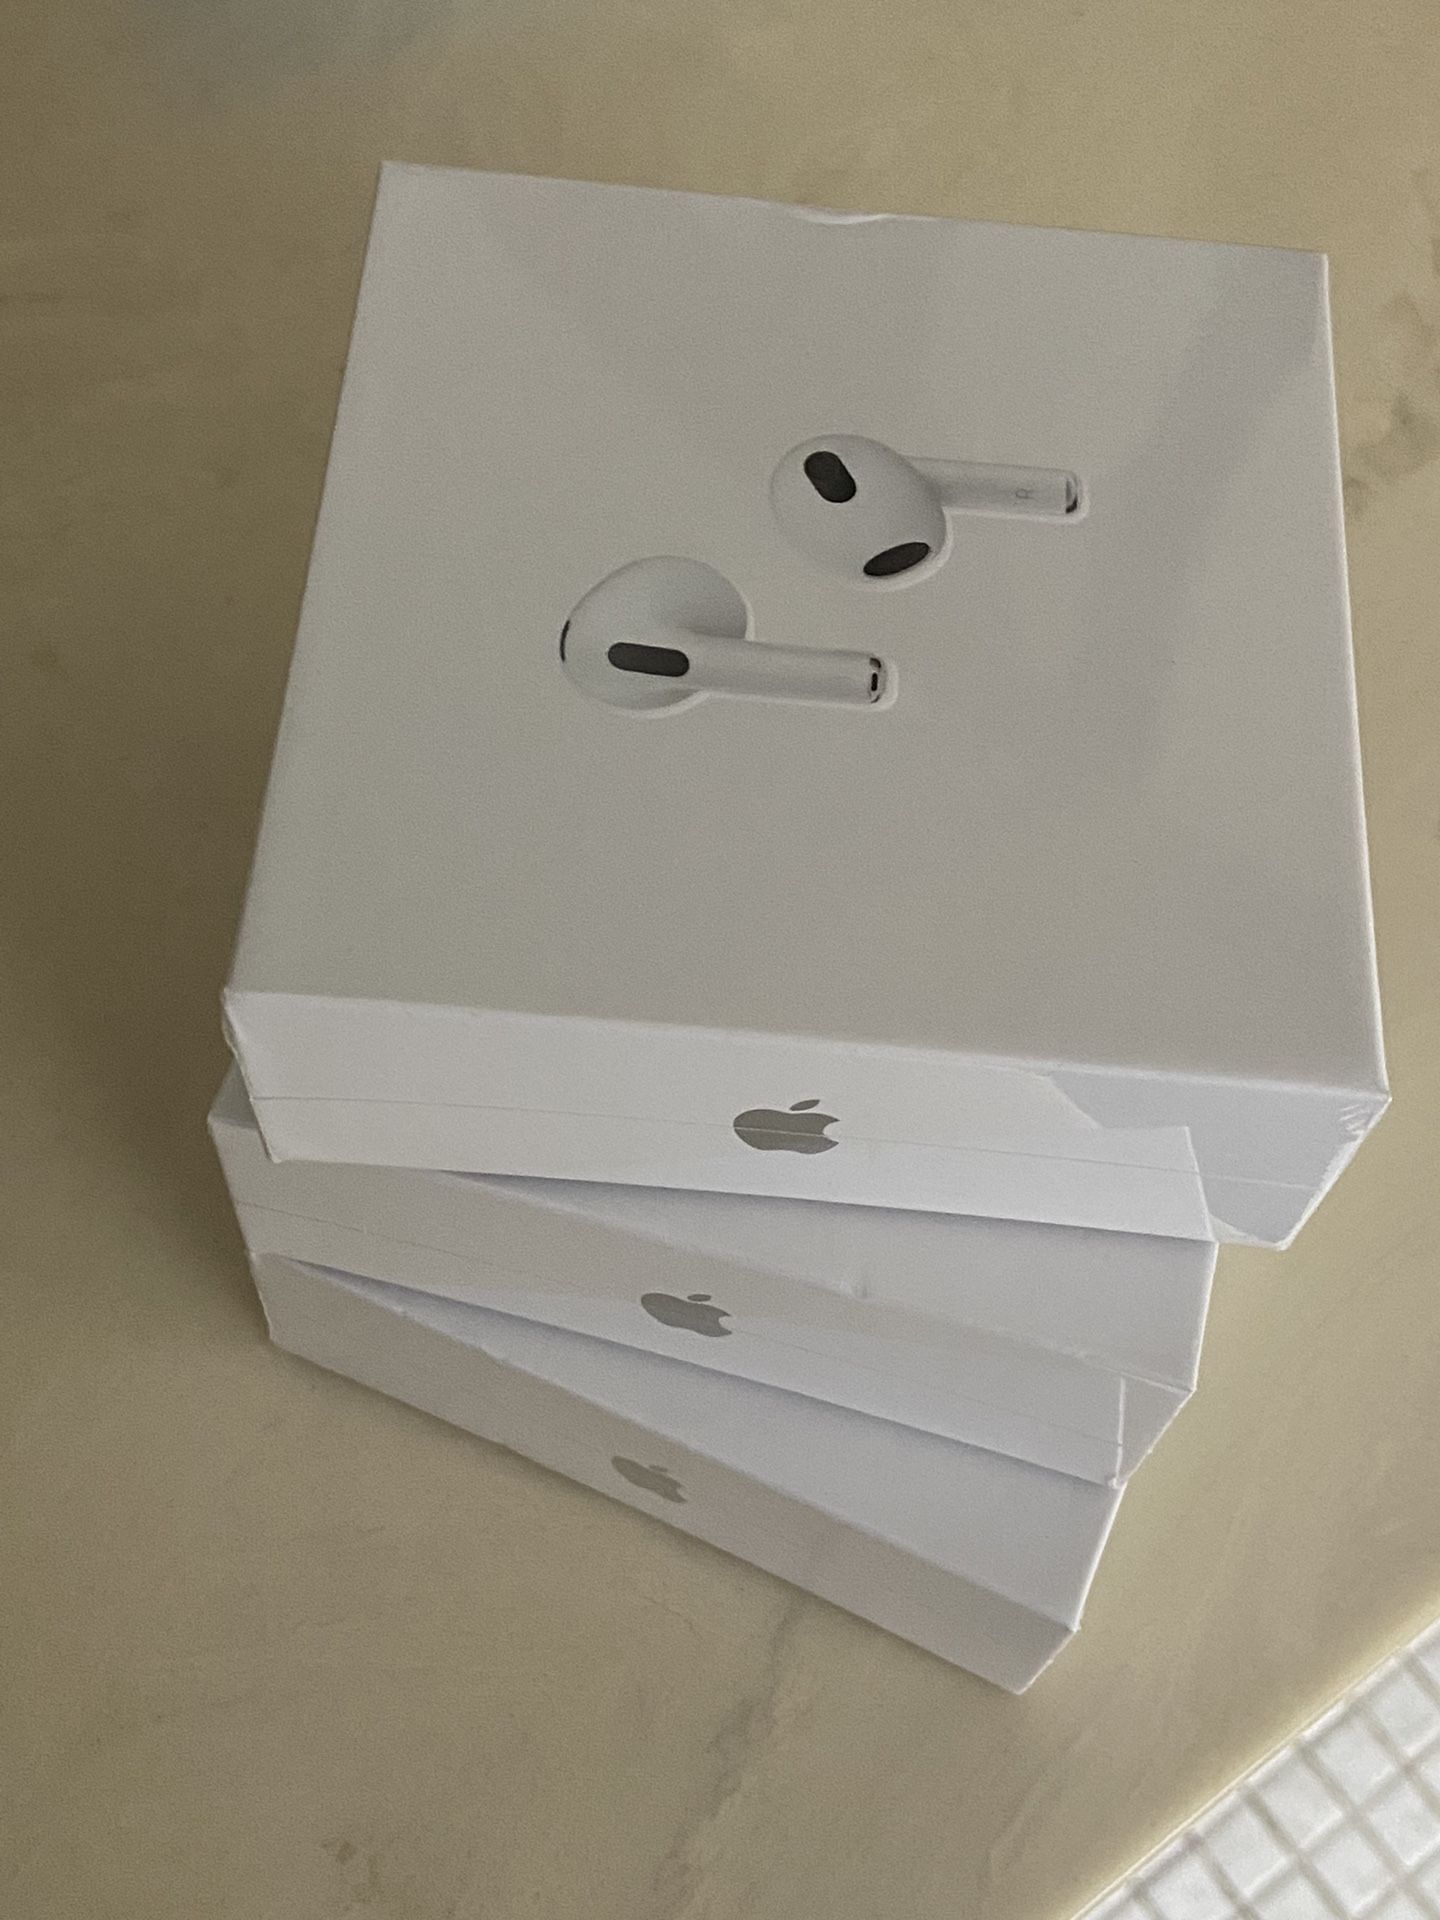 *Best Offer* Apple AirPods 3rd Generation (Brand New)